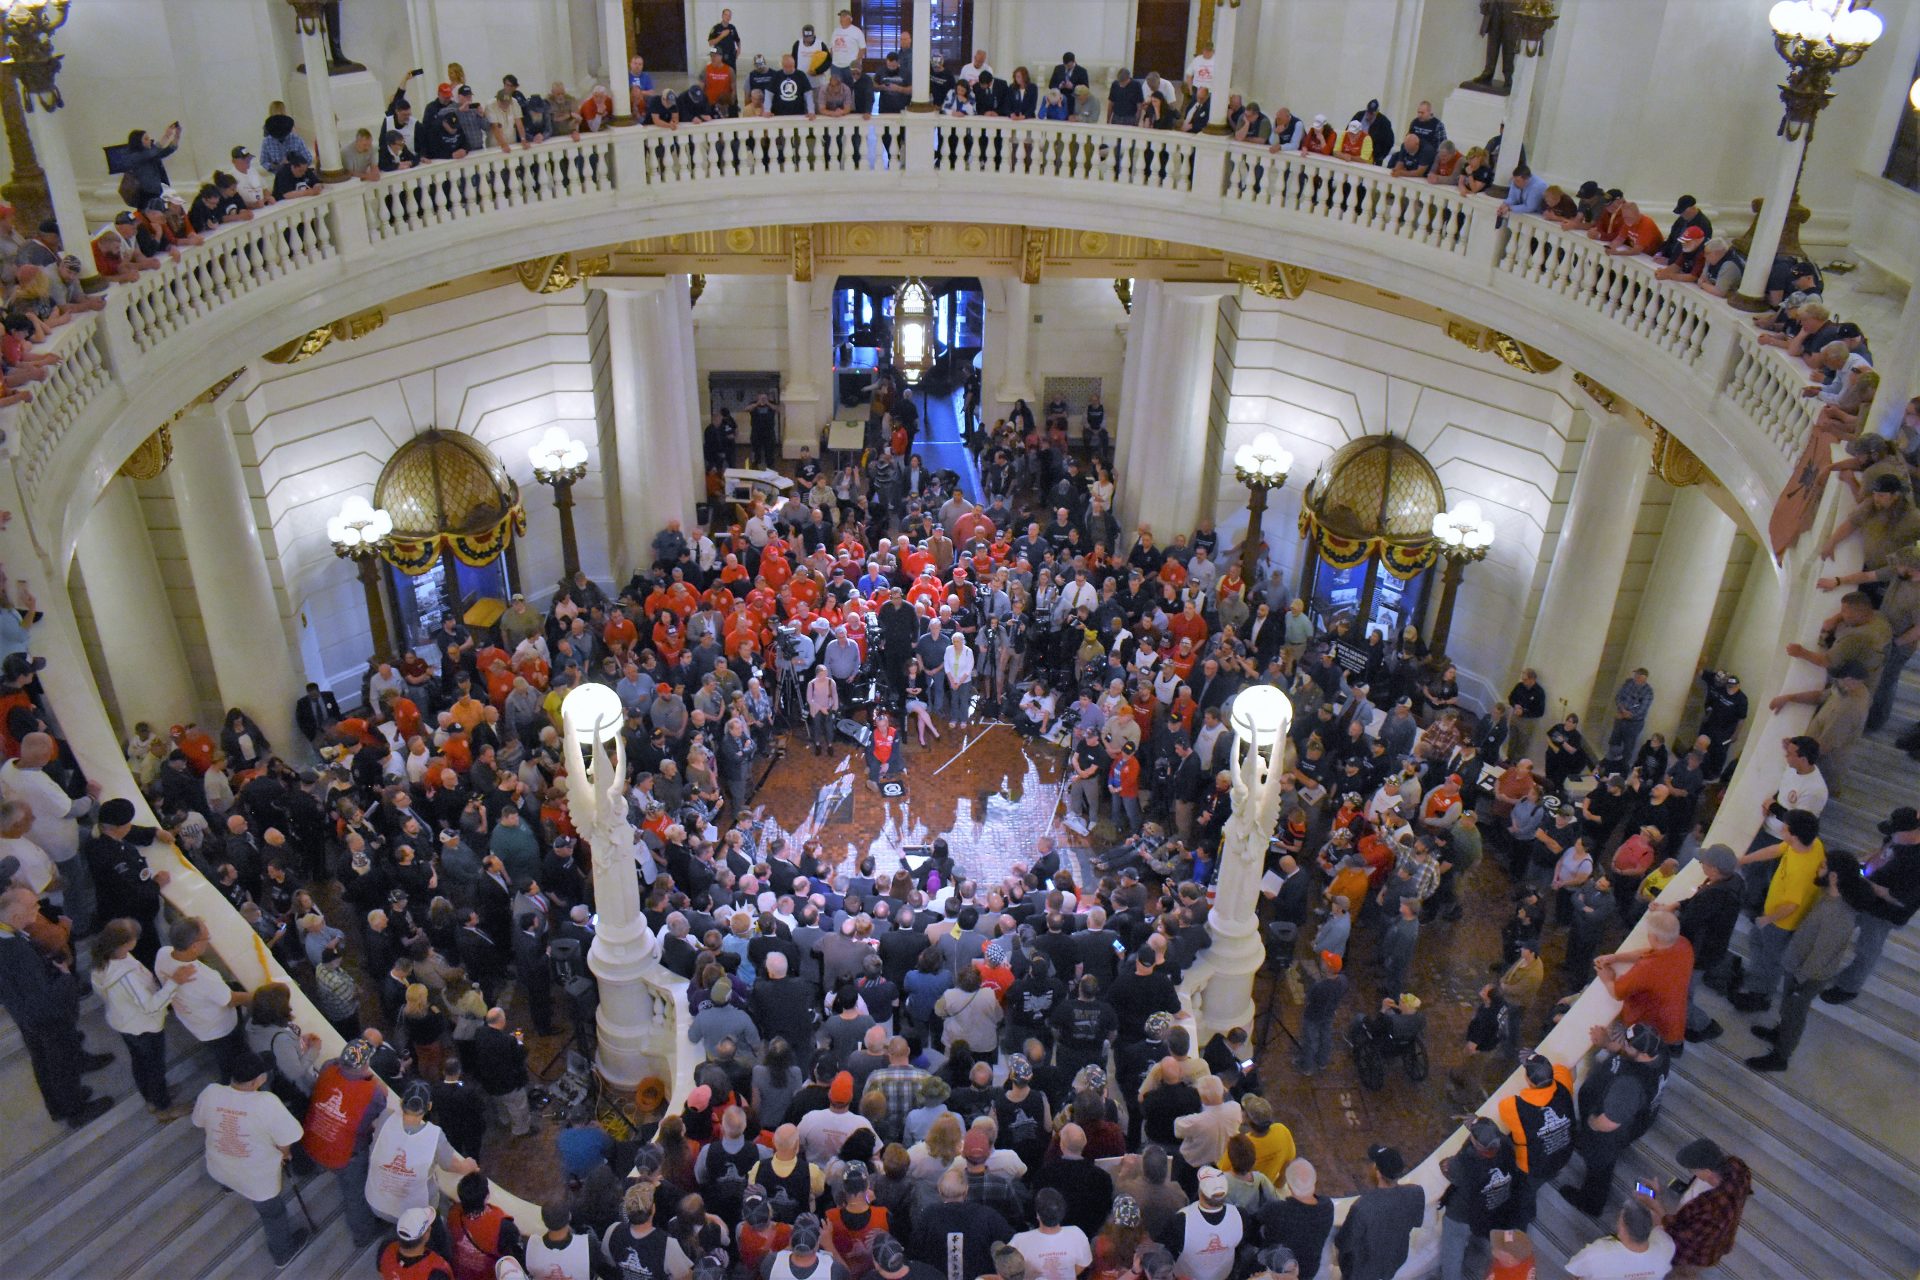 Hundreds of demonstrators gathered at a Second Amendment rally in the state Capitol on May 6, 2019.